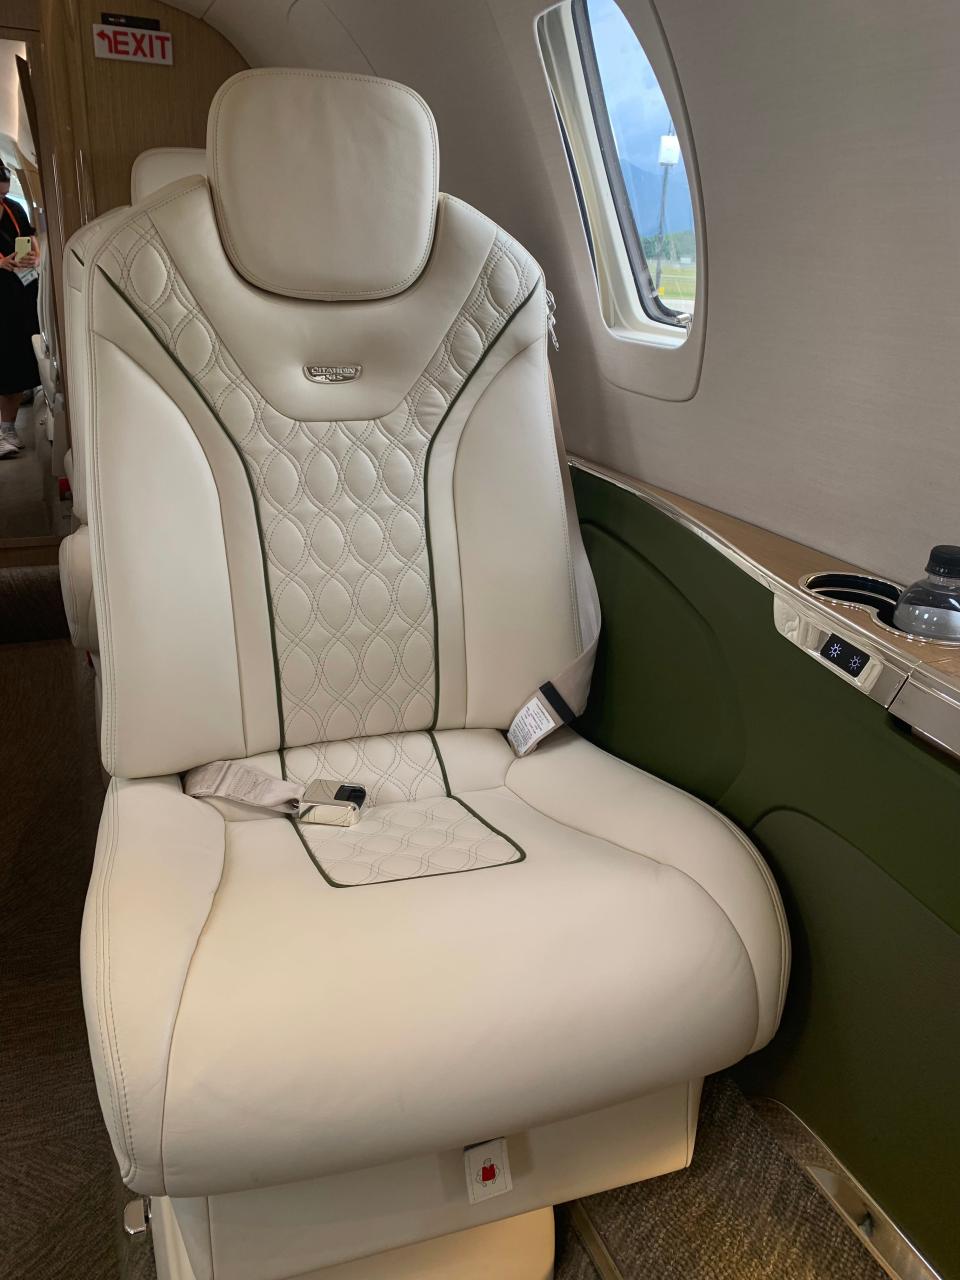 One of the seats onboard the Cessna Citation XLS Gen2.